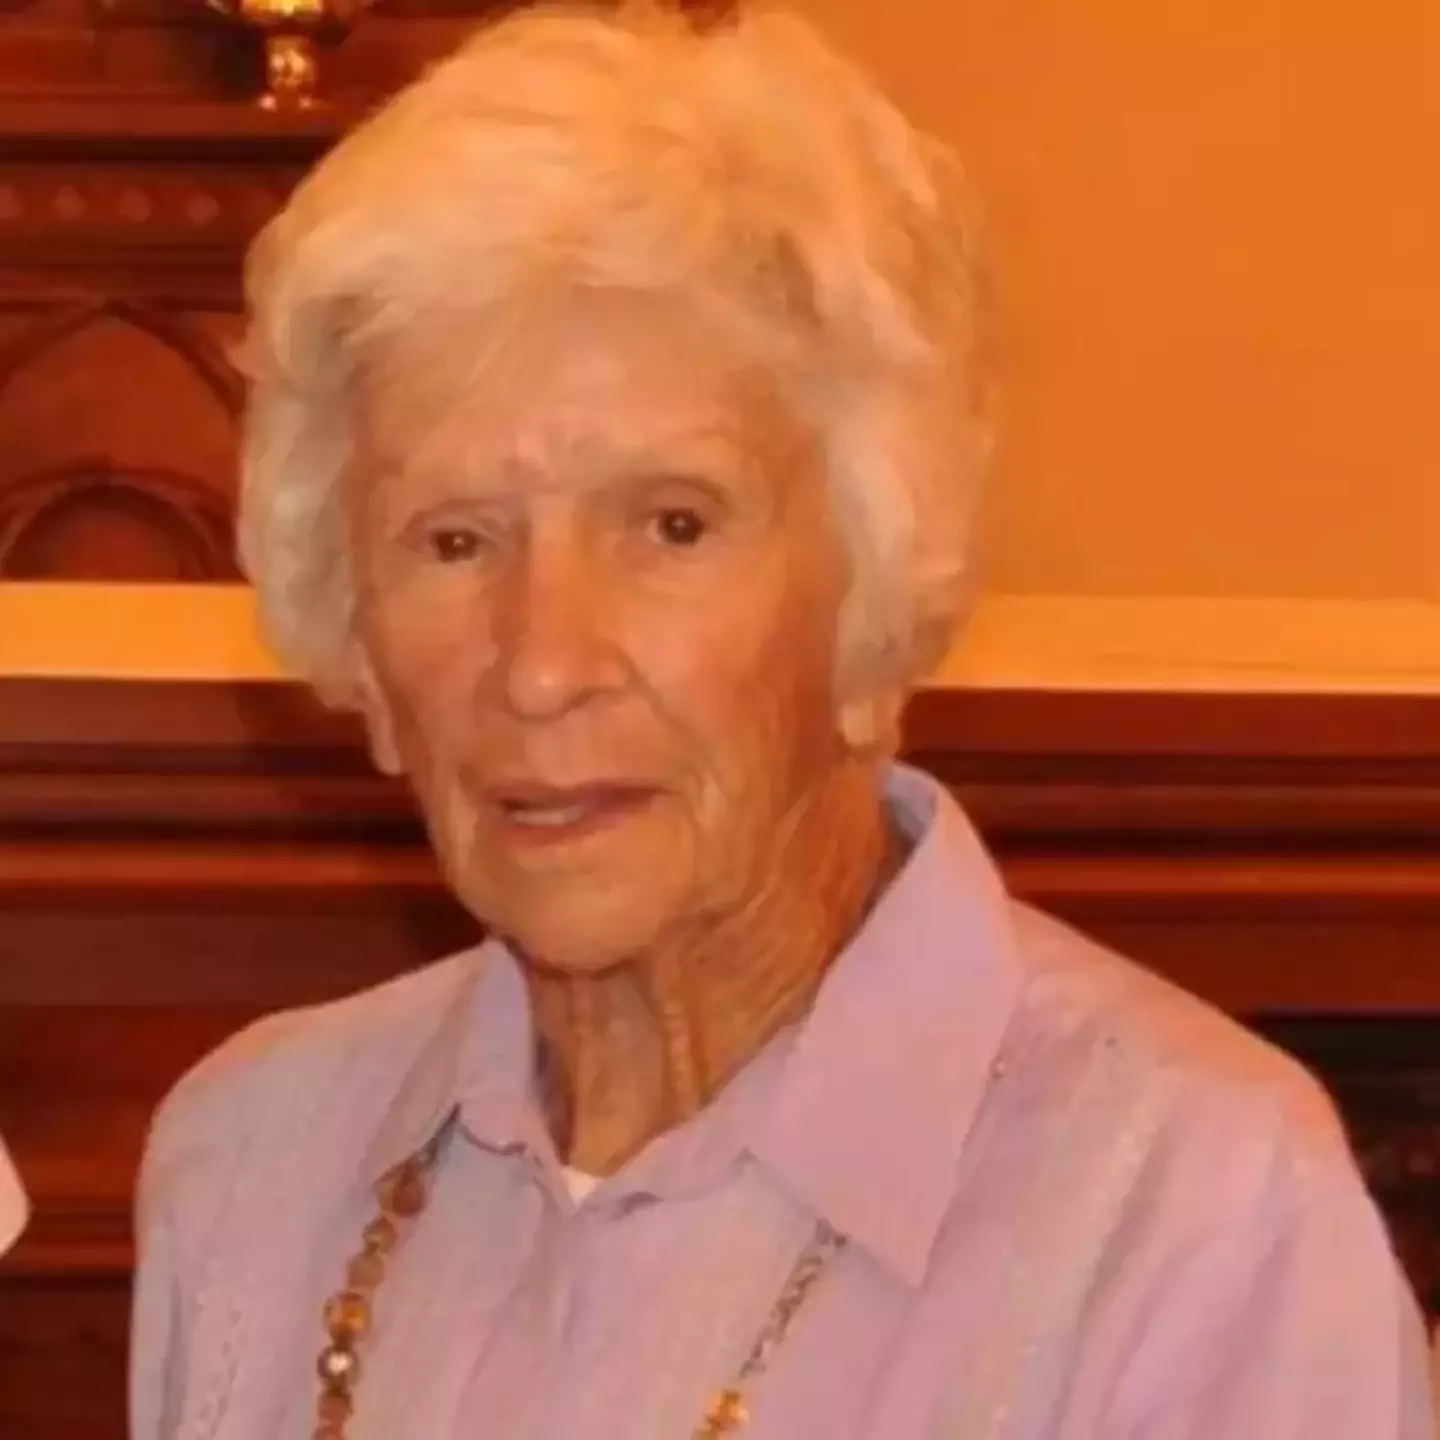 95-year-old woman Clare Nowland is in hospital receiving end of life care after being tasered by police.